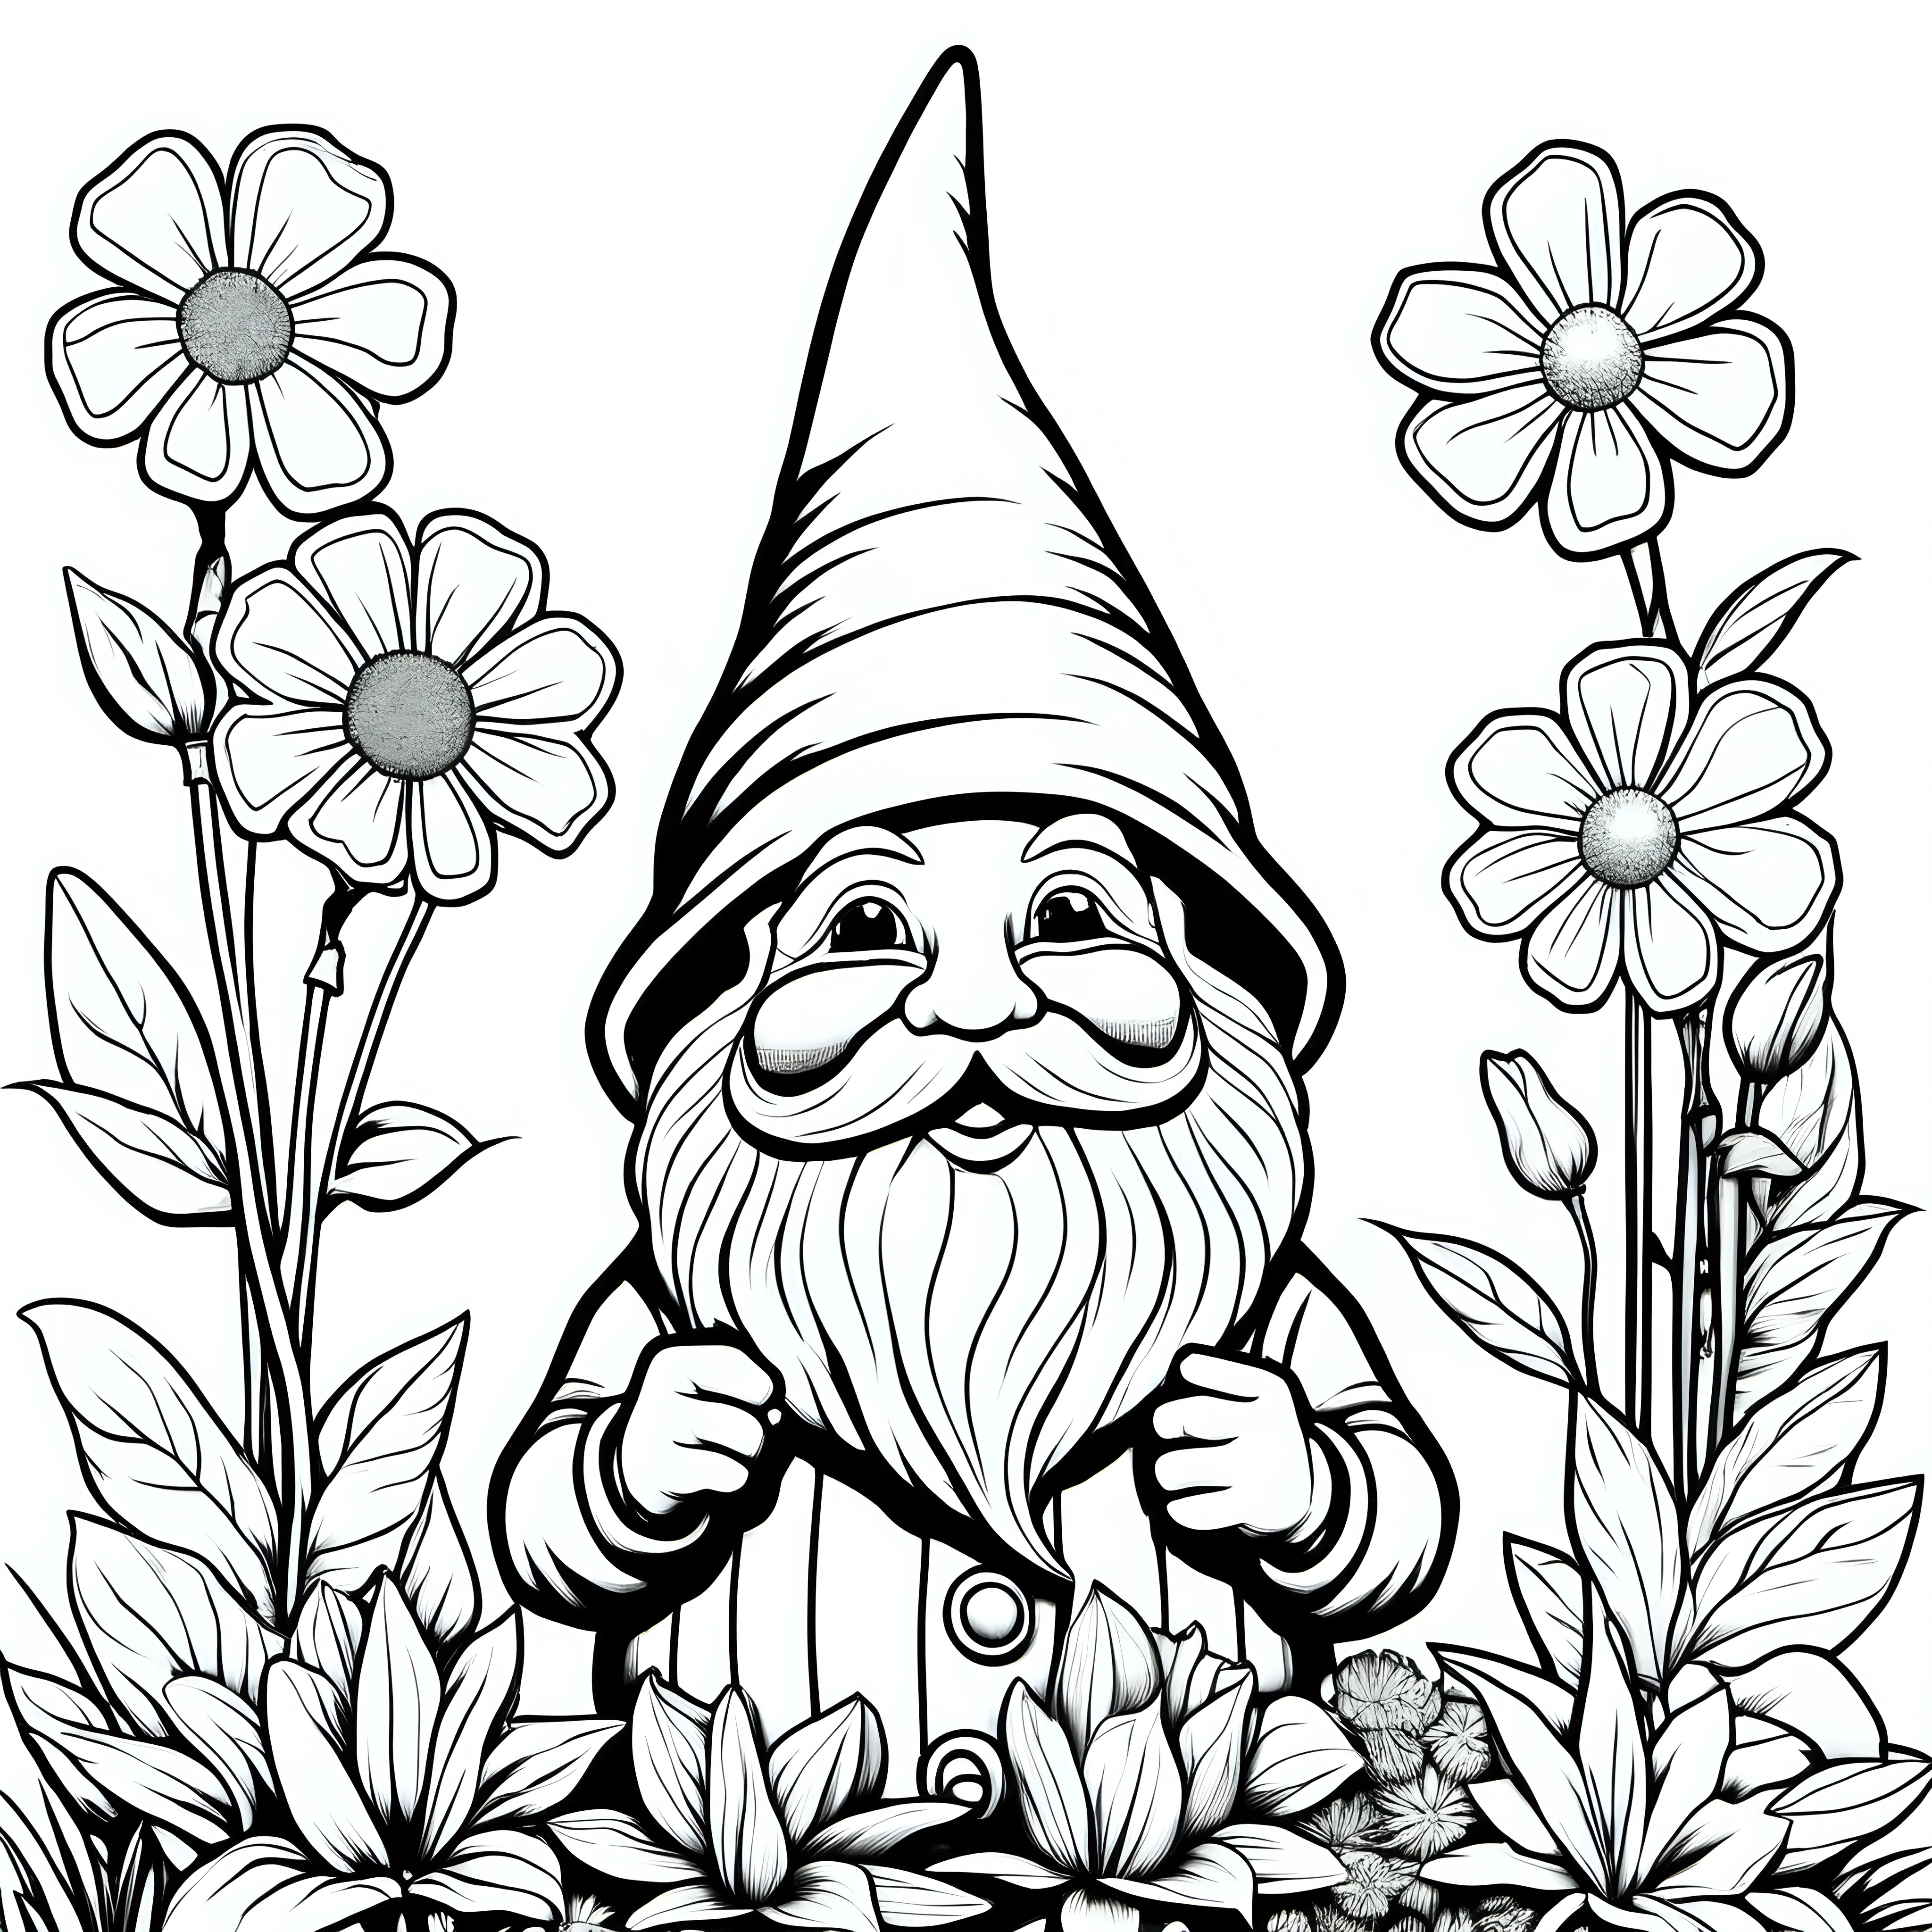 Garden Gnome Smelling Flowers Coloring Page Simple Black and White Artwork